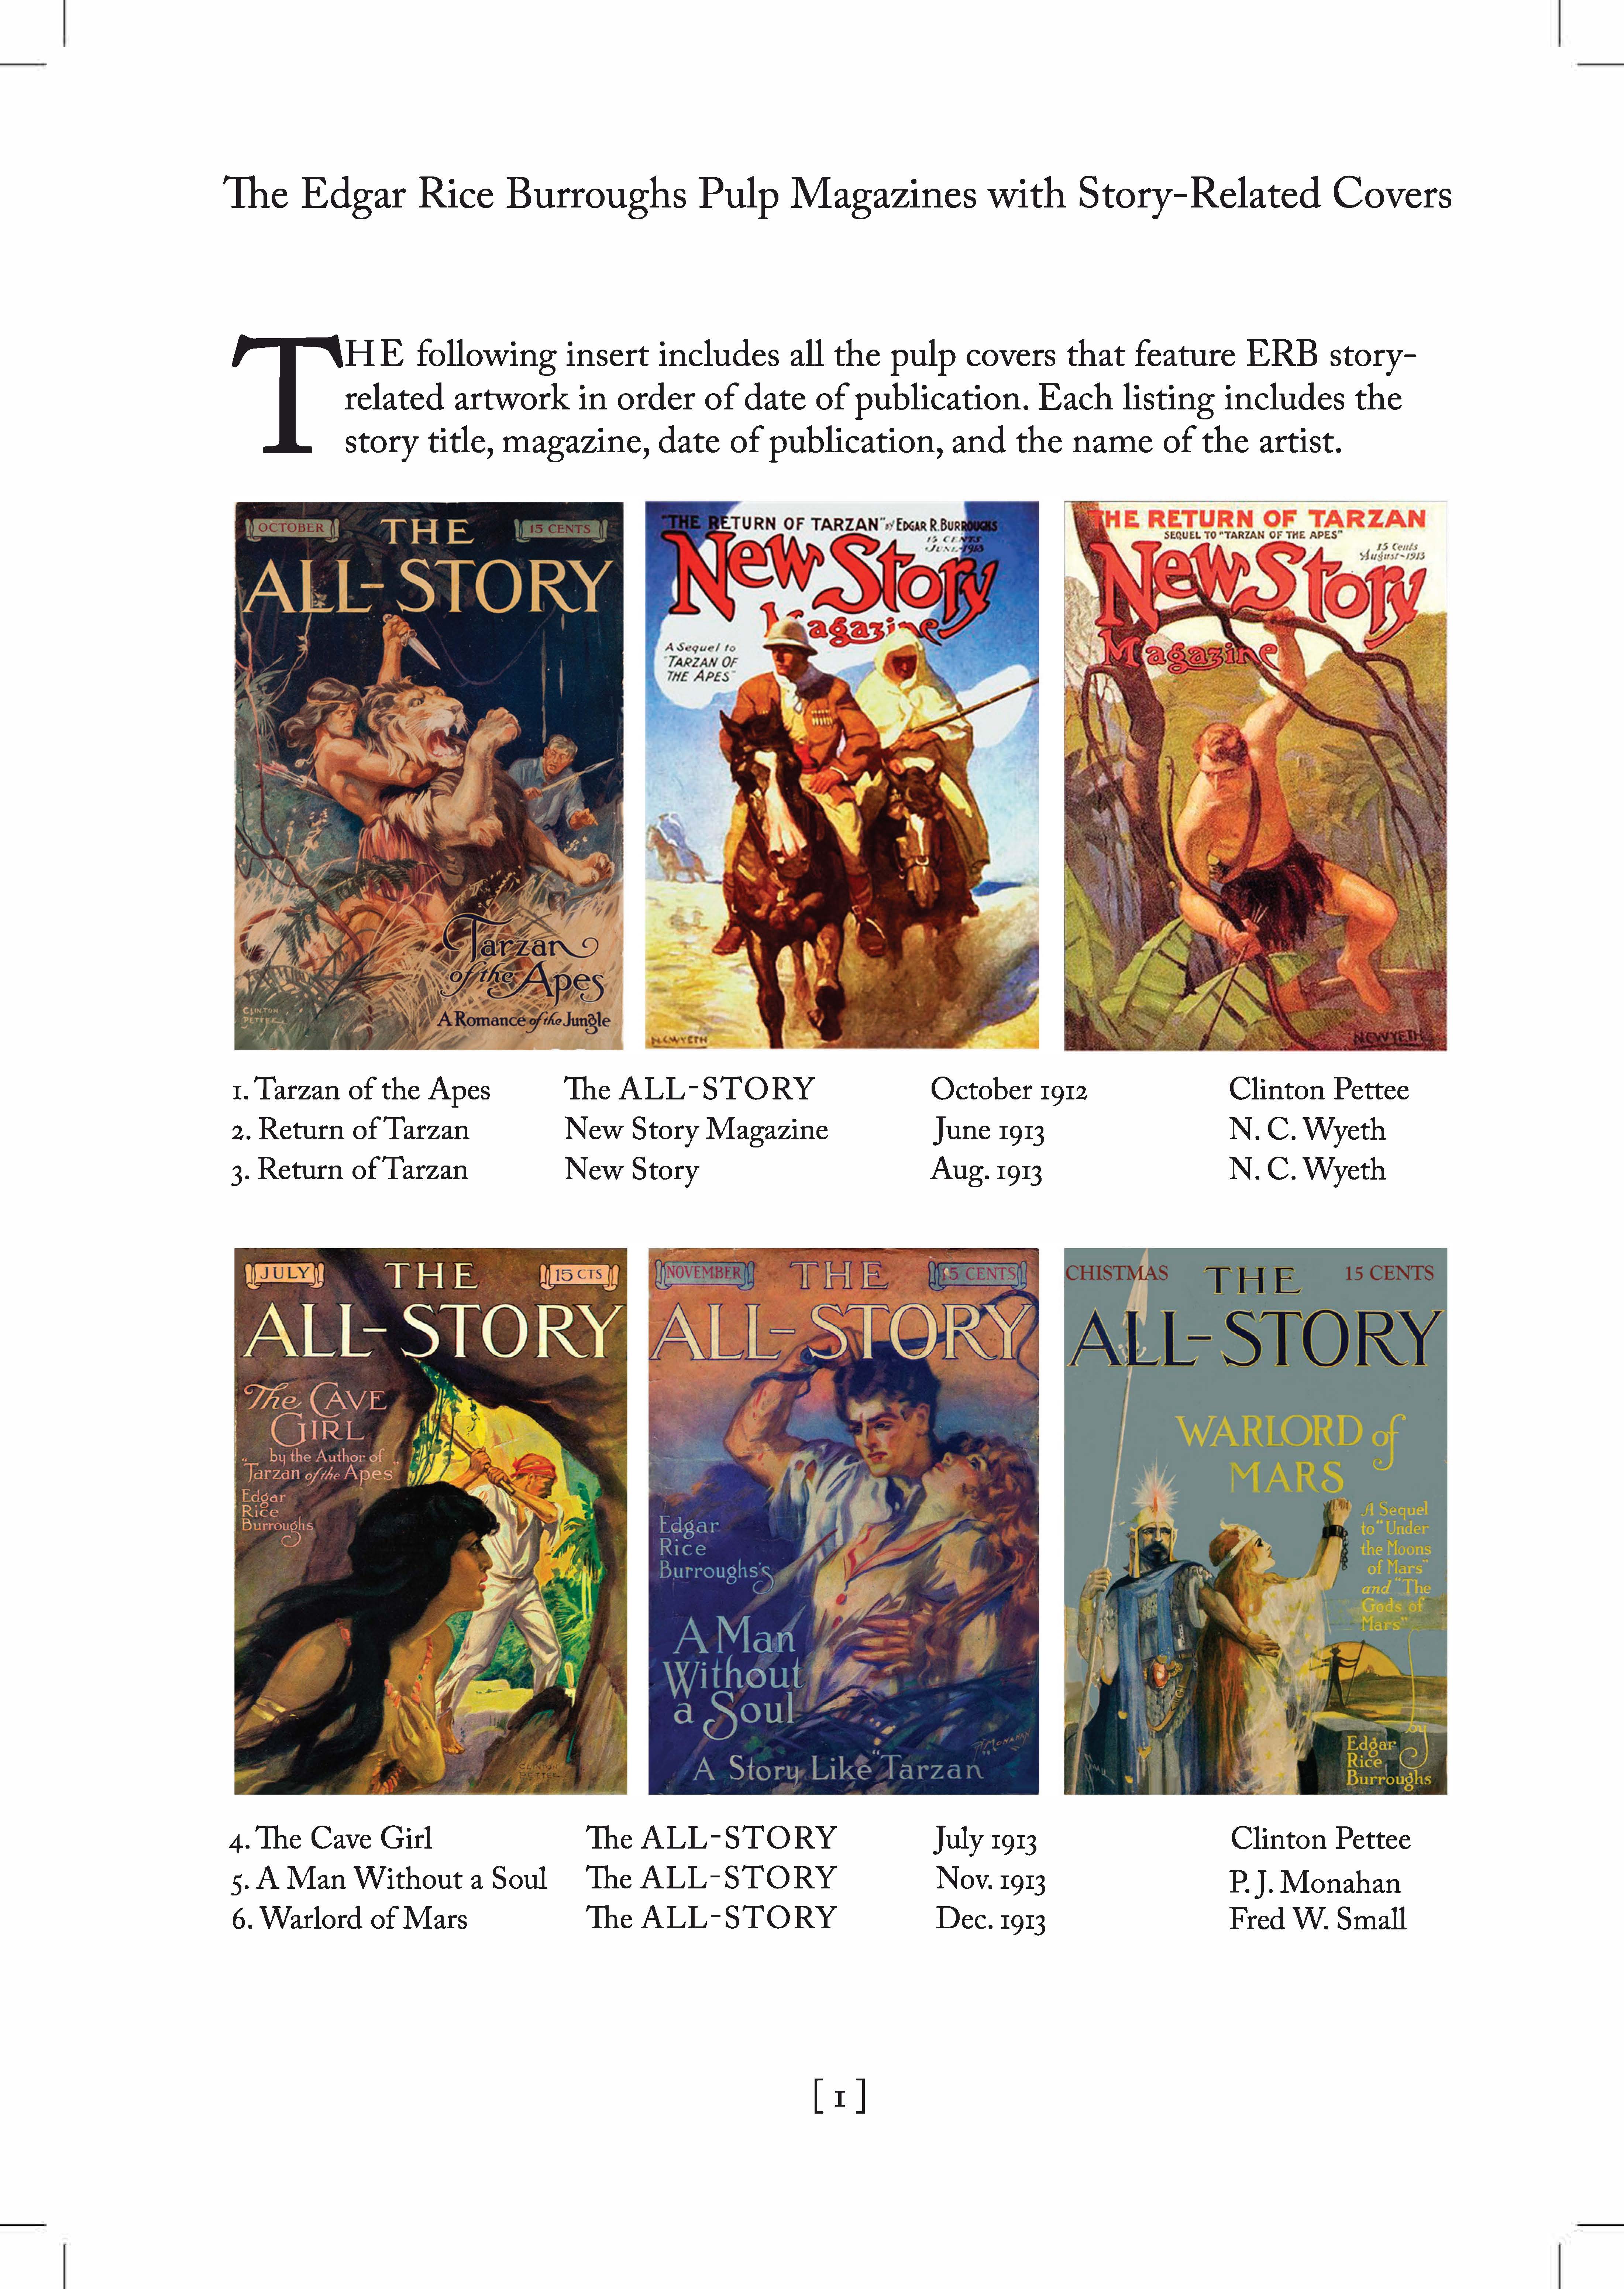 Page 1 of a 16 page section featuring the ERB related pulp covers